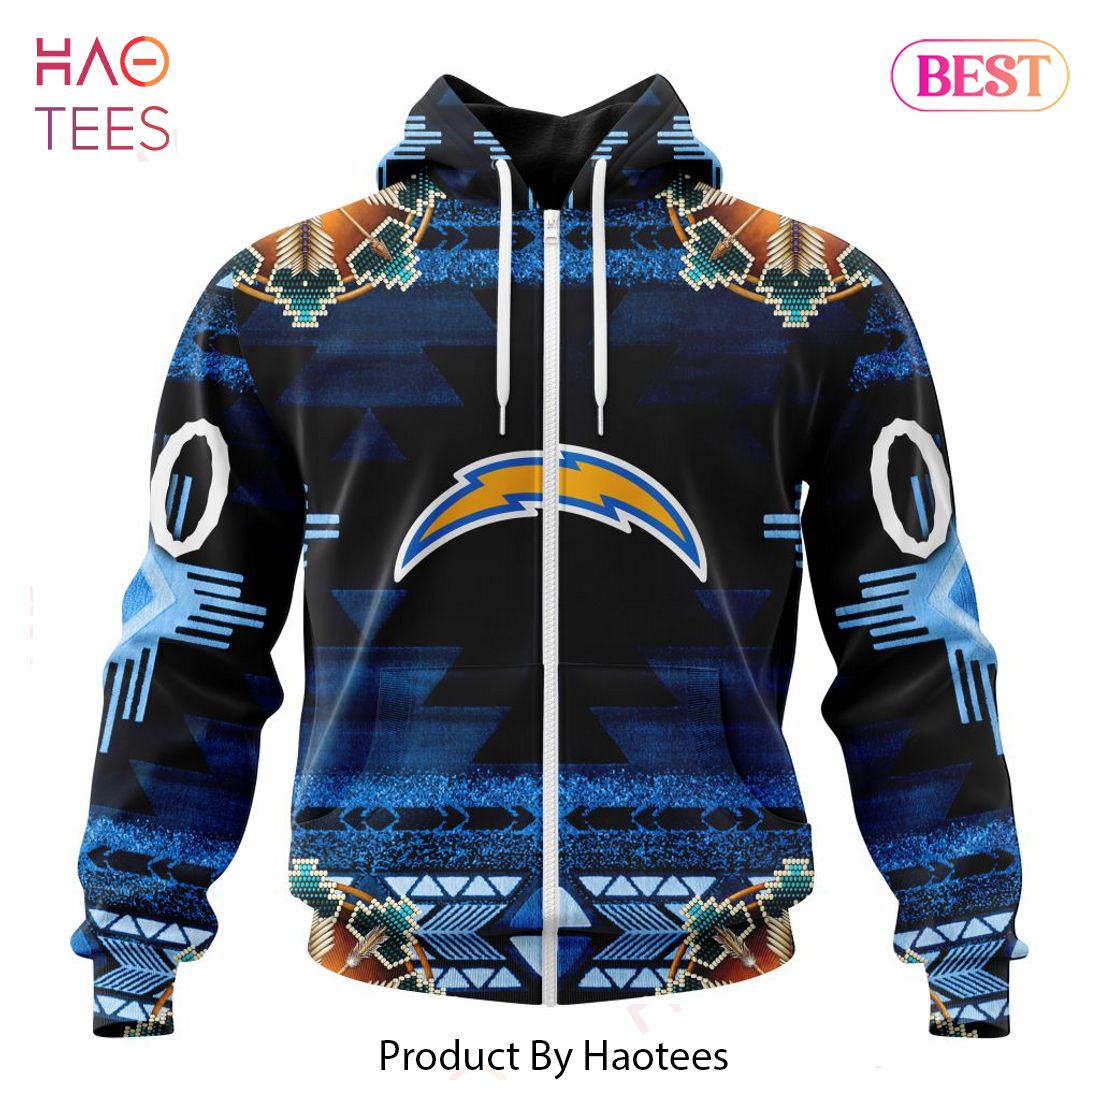 Fabric Traditions NFL Fleece Los Angeles Chargers Blue